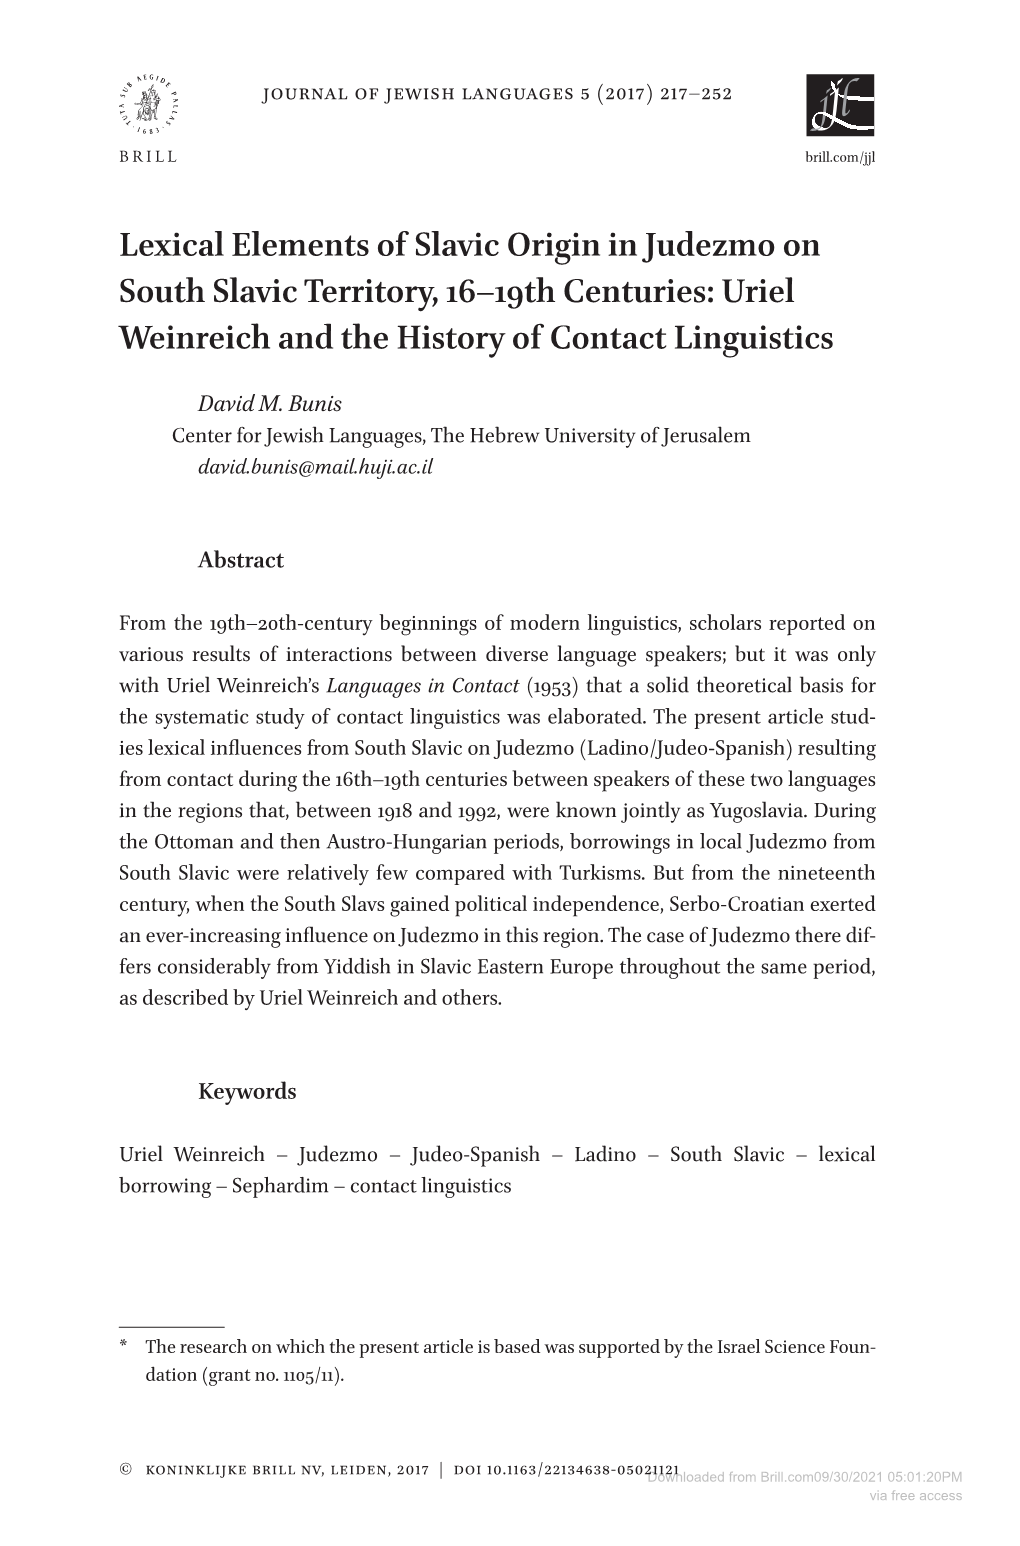 Lexical Elements of Slavic Origin in Judezmo on South Slavic Territory, 16–19Th Centuries: Uriel Weinreich and the History of Contact Linguistics